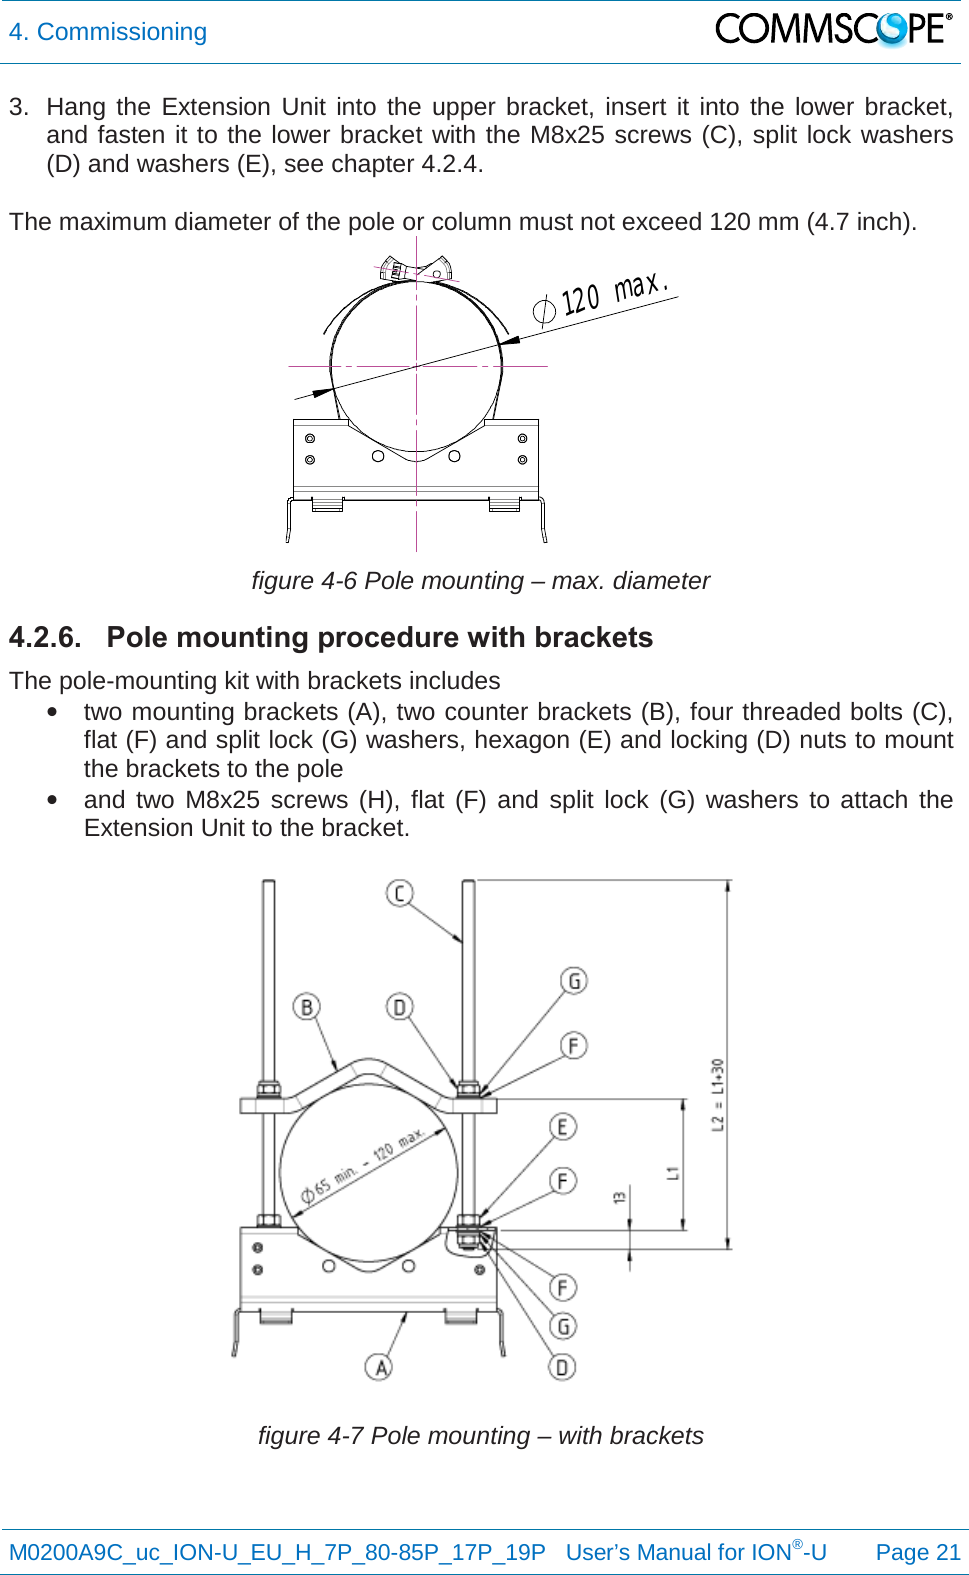 4. Commissioning   M0200A9C_uc_ION-U_EU_H_7P_80-85P_17P_19P   User’s Manual for ION®-U  Page 21  3. Hang the Extension Unit into the upper bracket, insert it into the lower bracket, and fasten it to the lower bracket with the M8x25 screws (C), split lock washers (D) and washers (E), see chapter 4.2.4.  The maximum diameter of the pole or column must not exceed 120 mm (4.7 inch).  figure 4-6 Pole mounting – max. diameter 4.2.6. Pole mounting procedure with brackets The pole-mounting kit with brackets includes • two mounting brackets (A), two counter brackets (B), four threaded bolts (C), flat (F) and split lock (G) washers, hexagon (E) and locking (D) nuts to mount the brackets to the pole • and two M8x25 screws (H), flat (F) and split lock (G) washers to attach the Extension Unit to the bracket.  figure 4-7 Pole mounting – with brackets 120max.